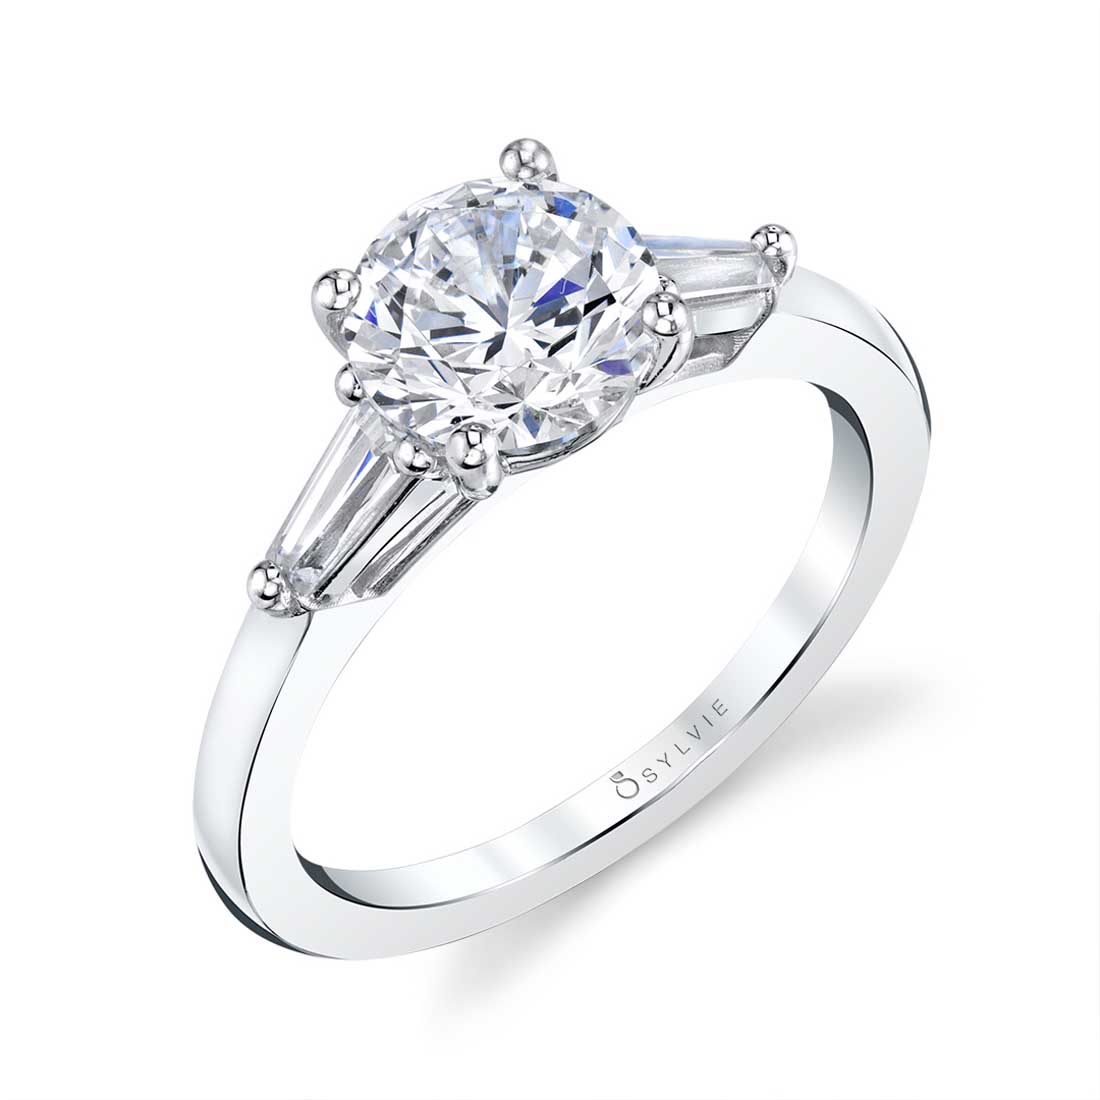 Nicolette | 14kt White Gold Round Cut Three Stone Diamond Engagement Ring With Baguettes